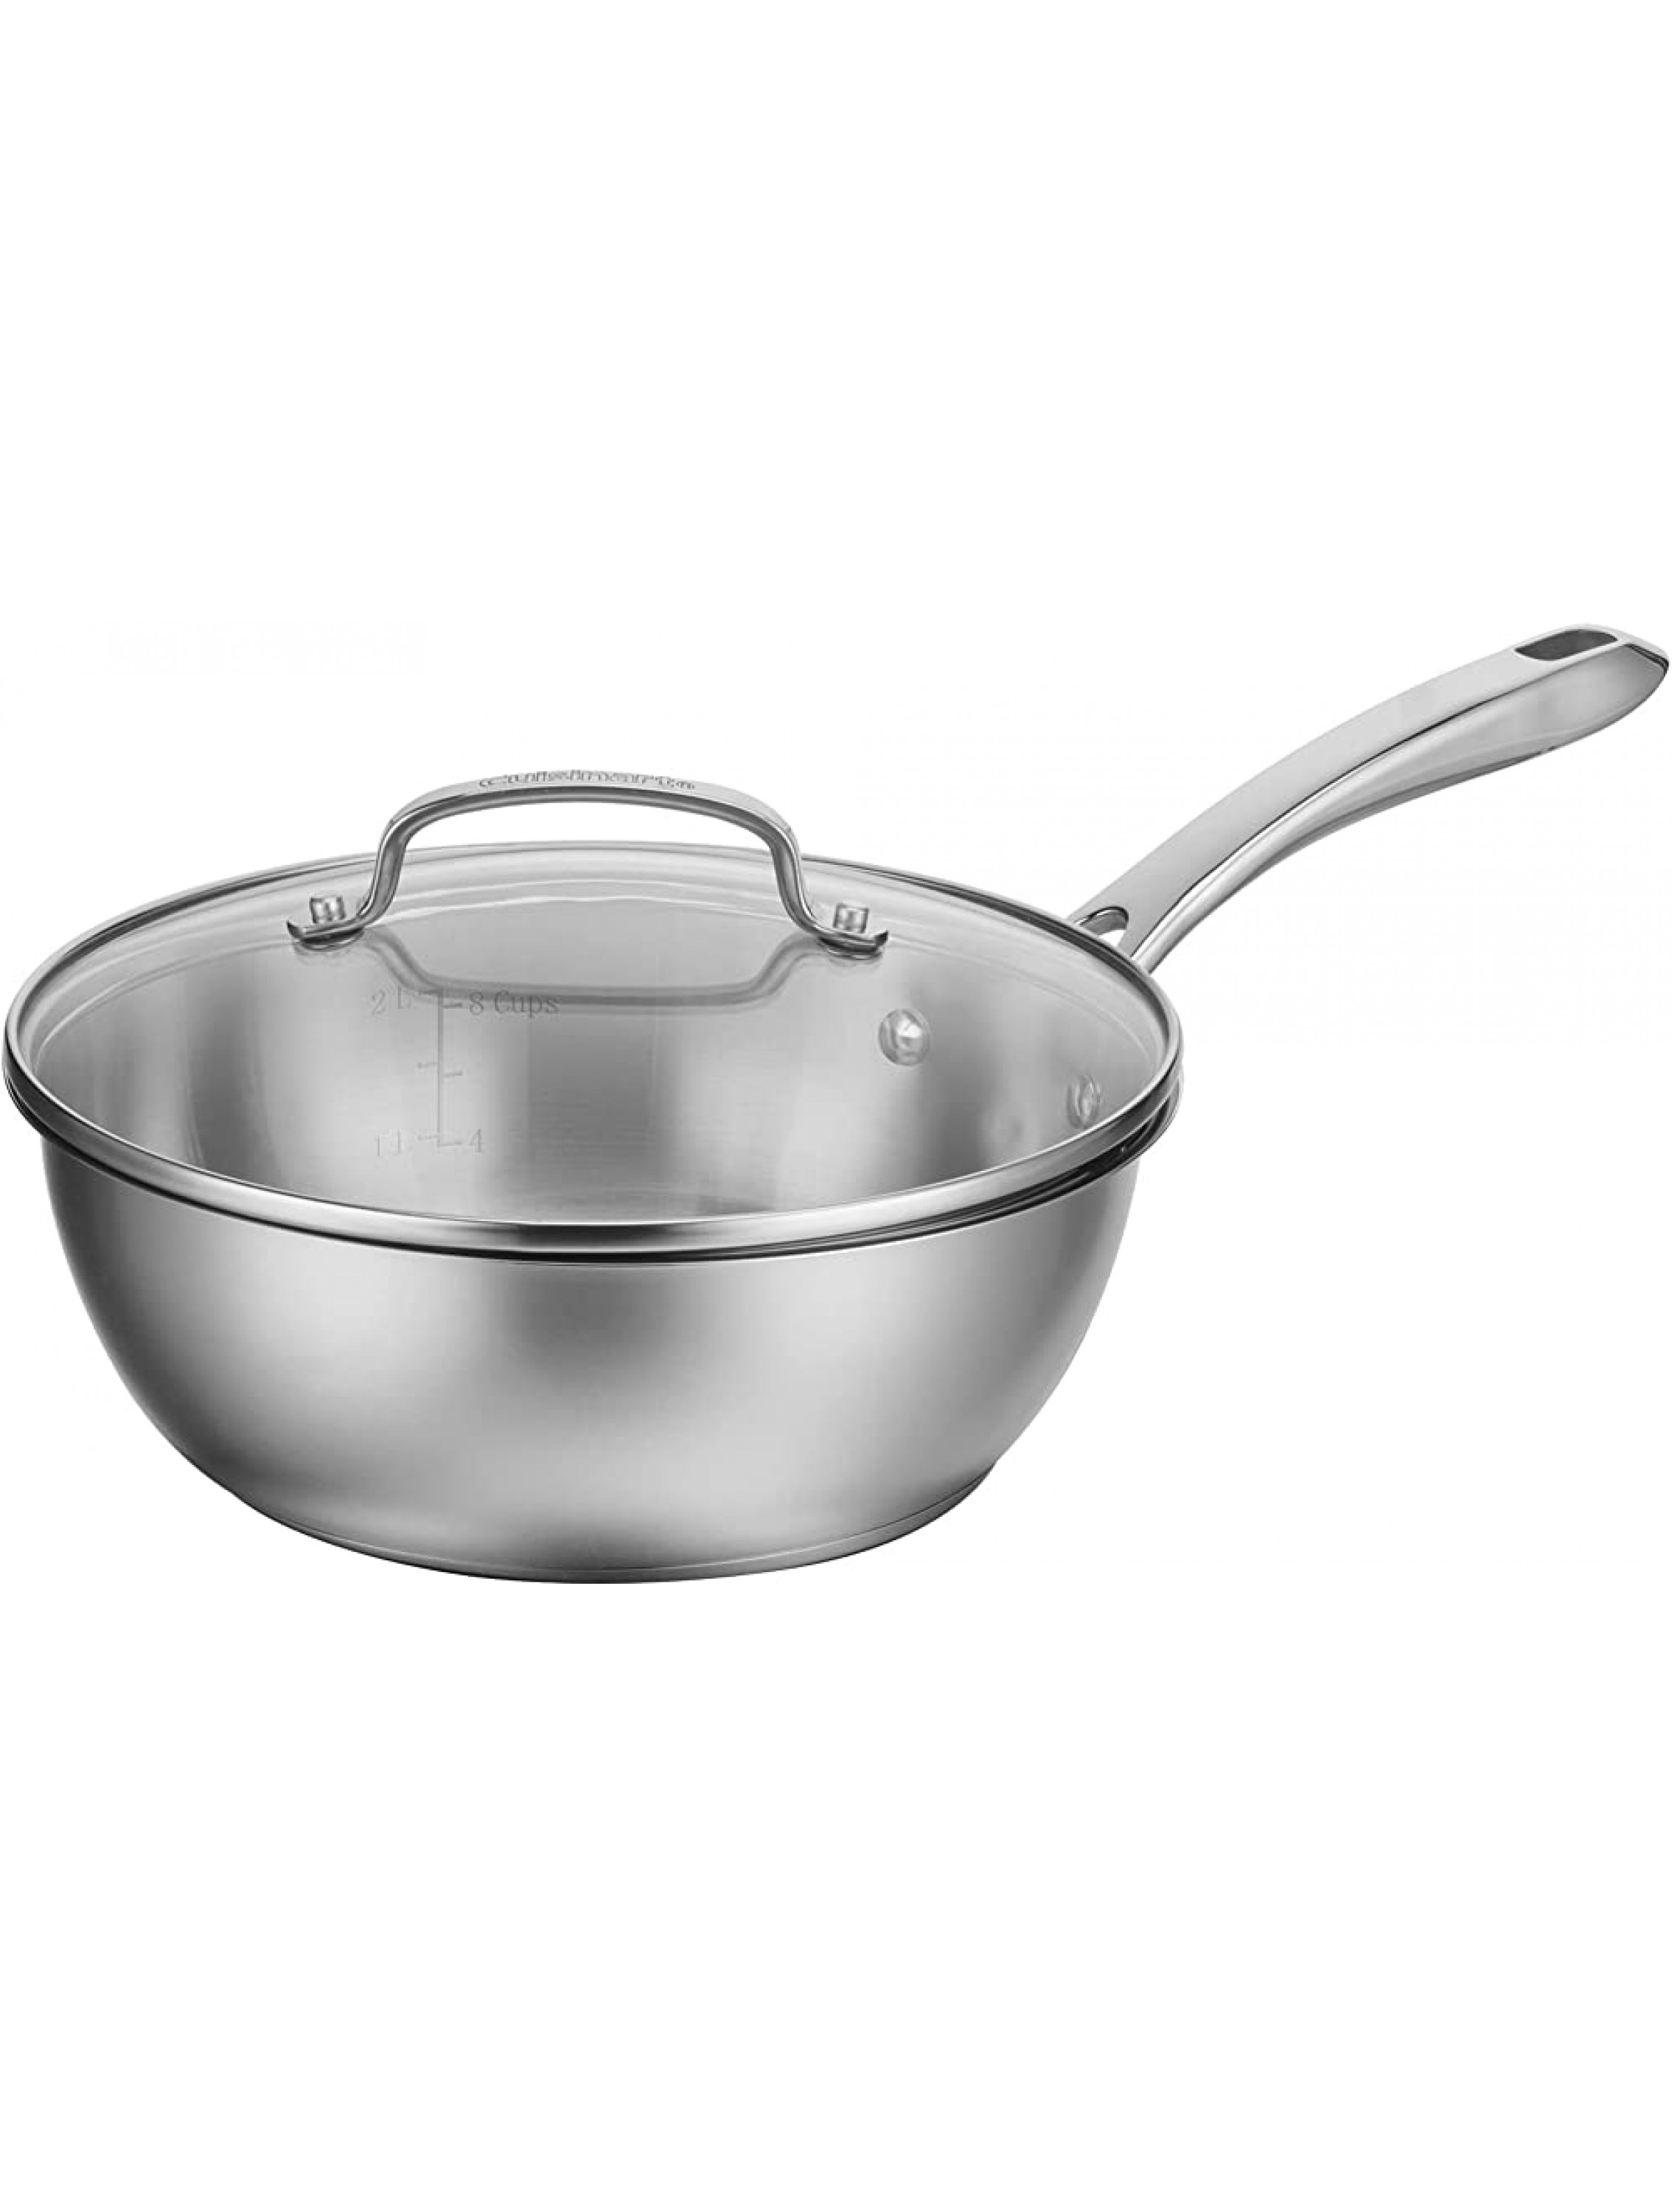 Cuisinart 8335-24 3 Quart Stainless Steel Chef's Pan - BF9YPDWCF